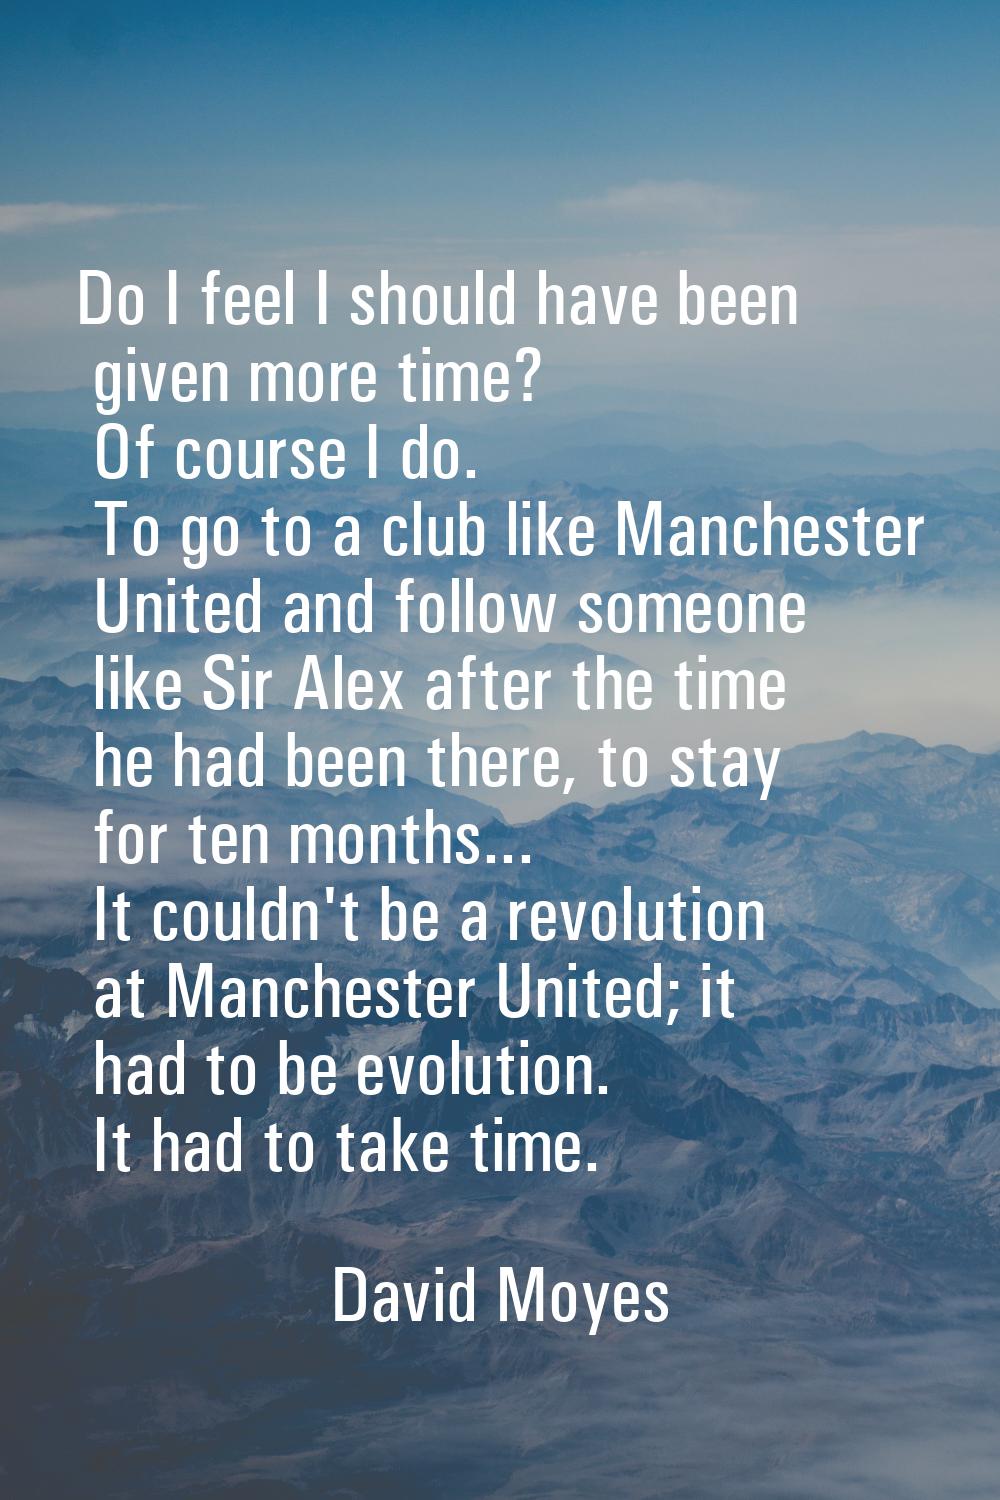 Do I feel I should have been given more time? Of course I do. To go to a club like Manchester Unite